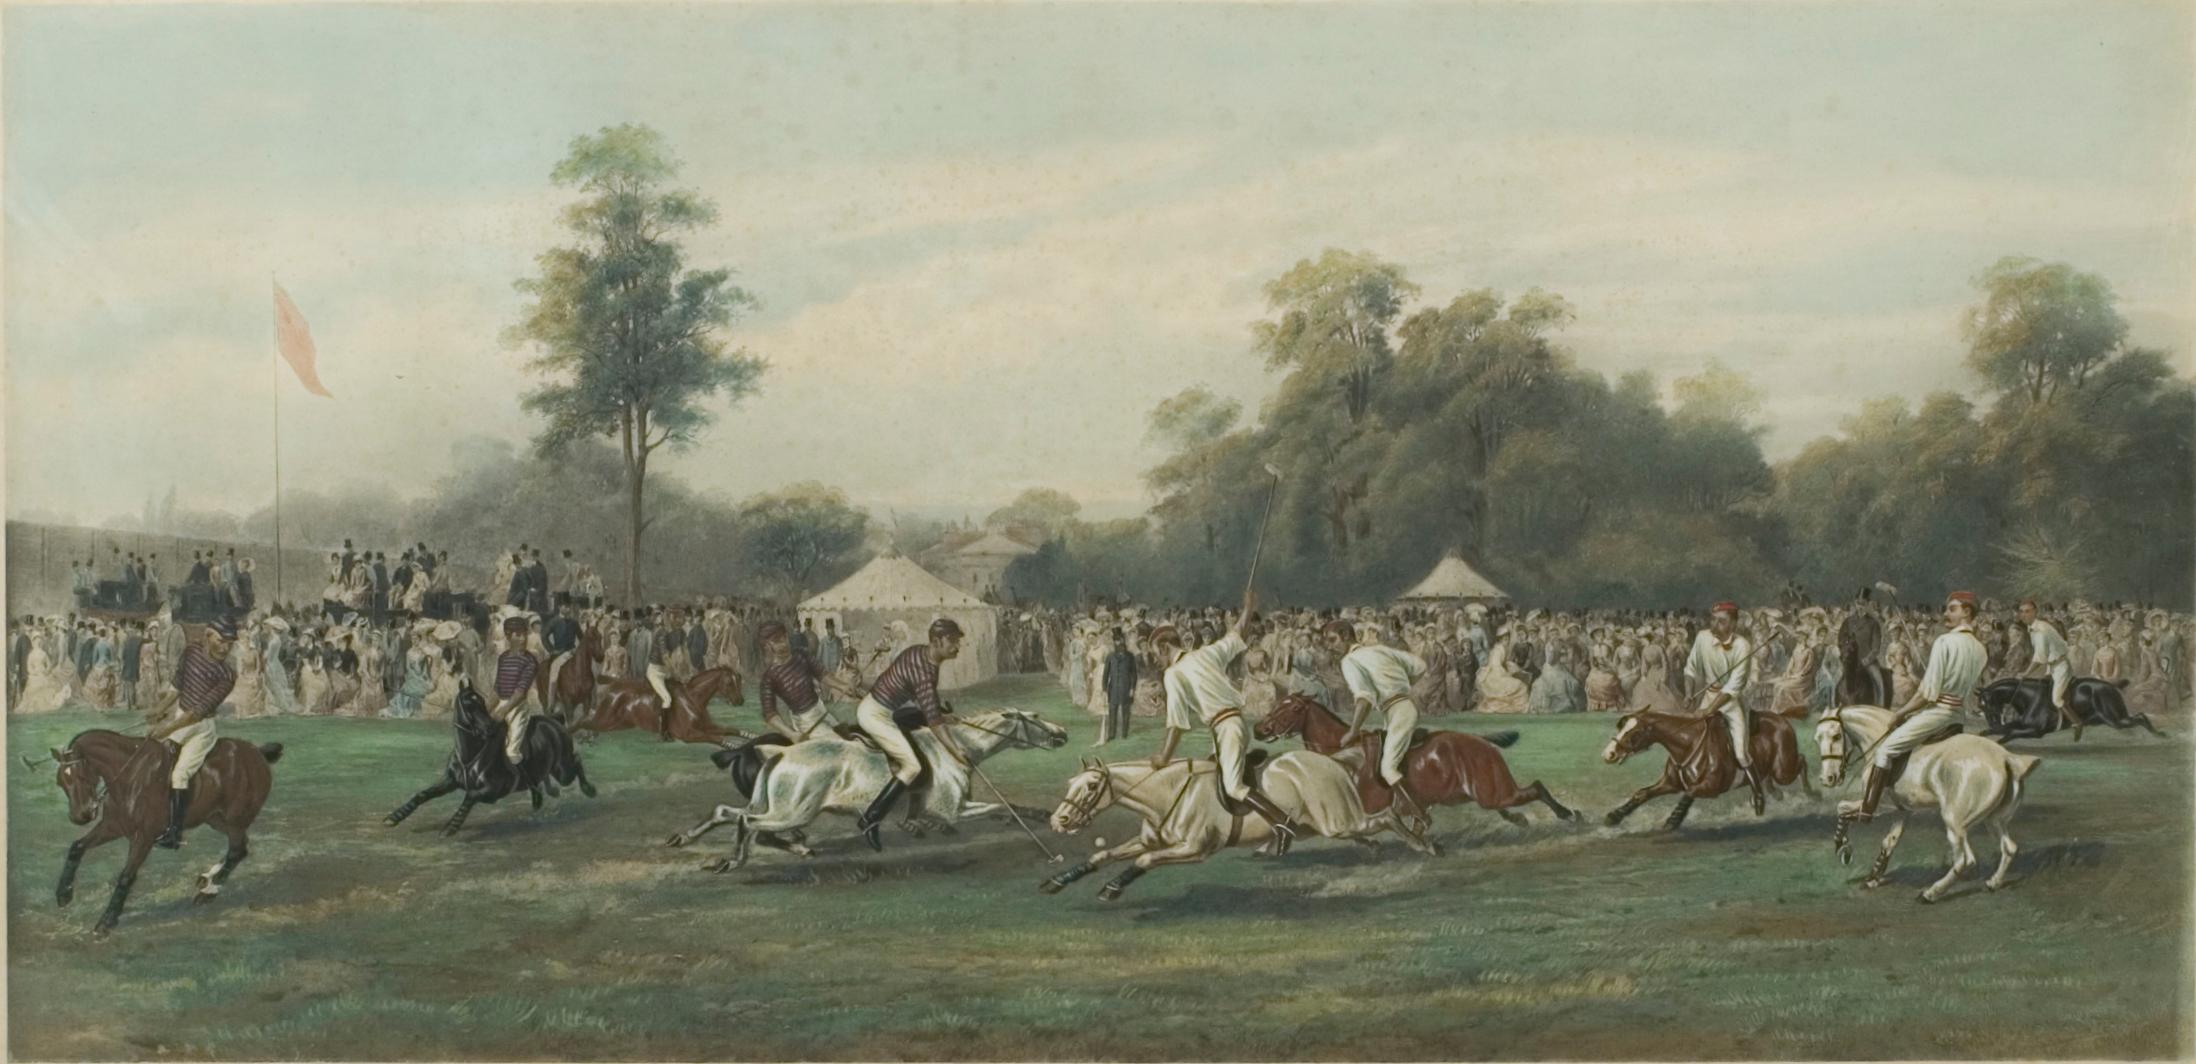 Sporting Art Antique Polo Print, Match at Hurlingham Between the Horse Guards 'Blues'..